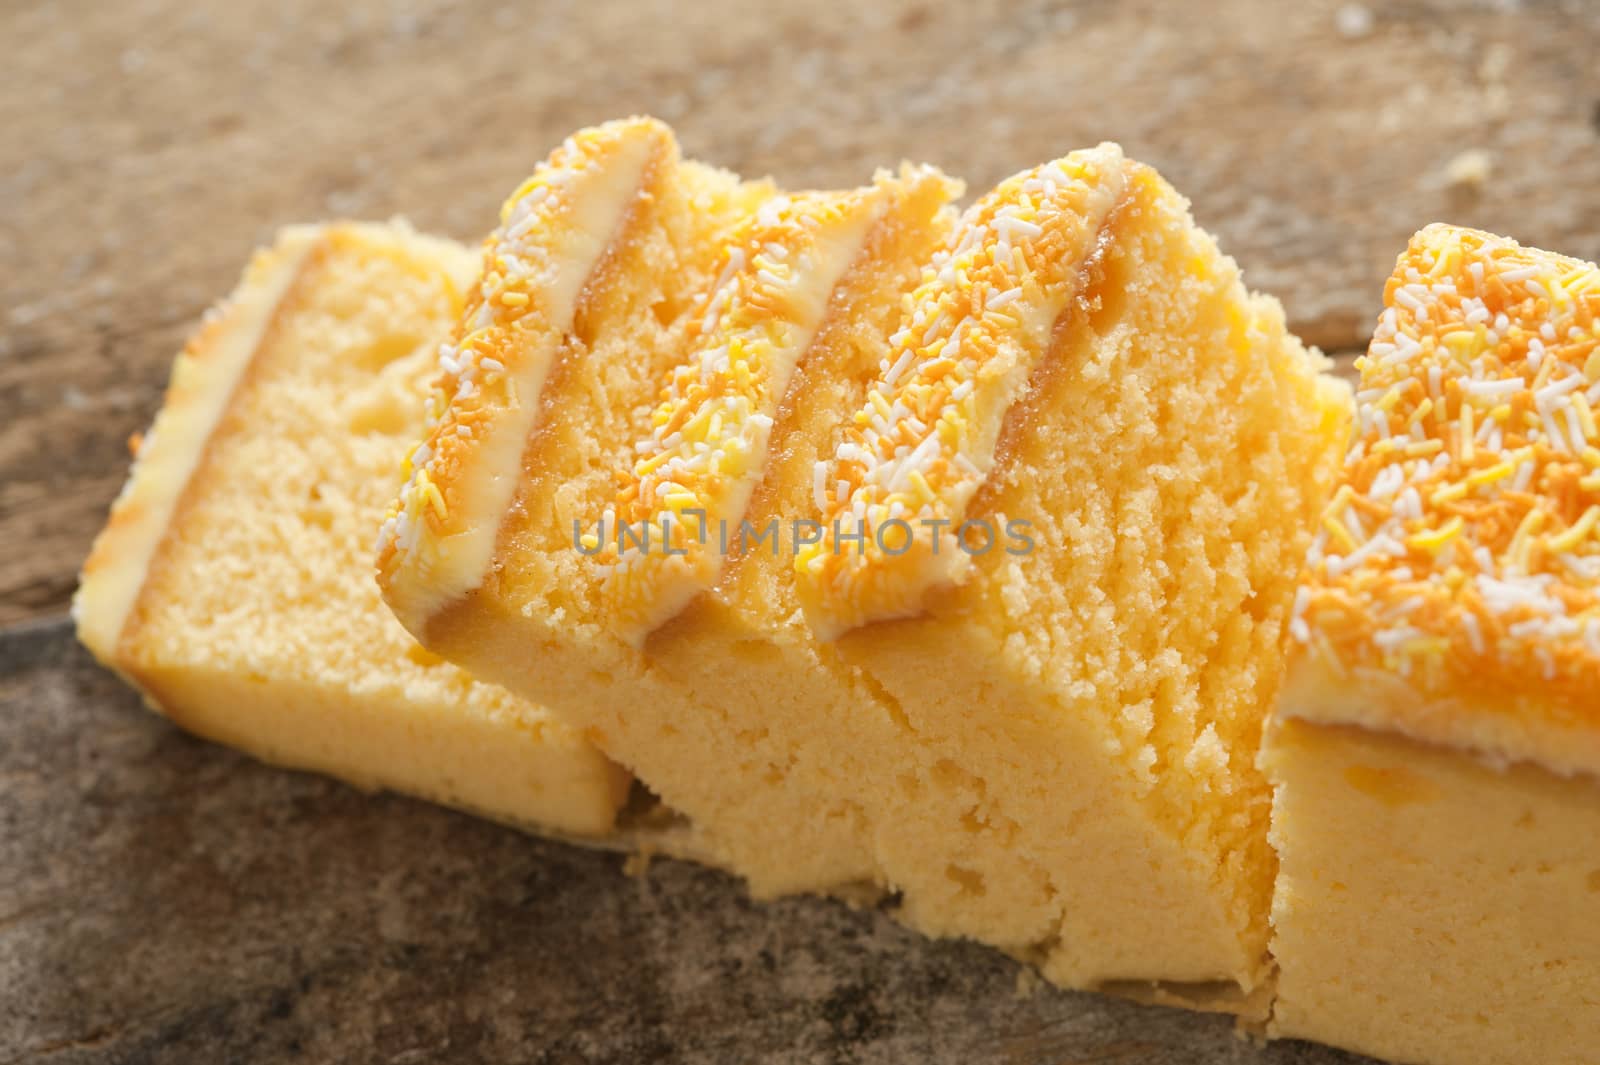 Close up of yellow cake with sprinkles and icing sliced into small portions on a rustic wood table